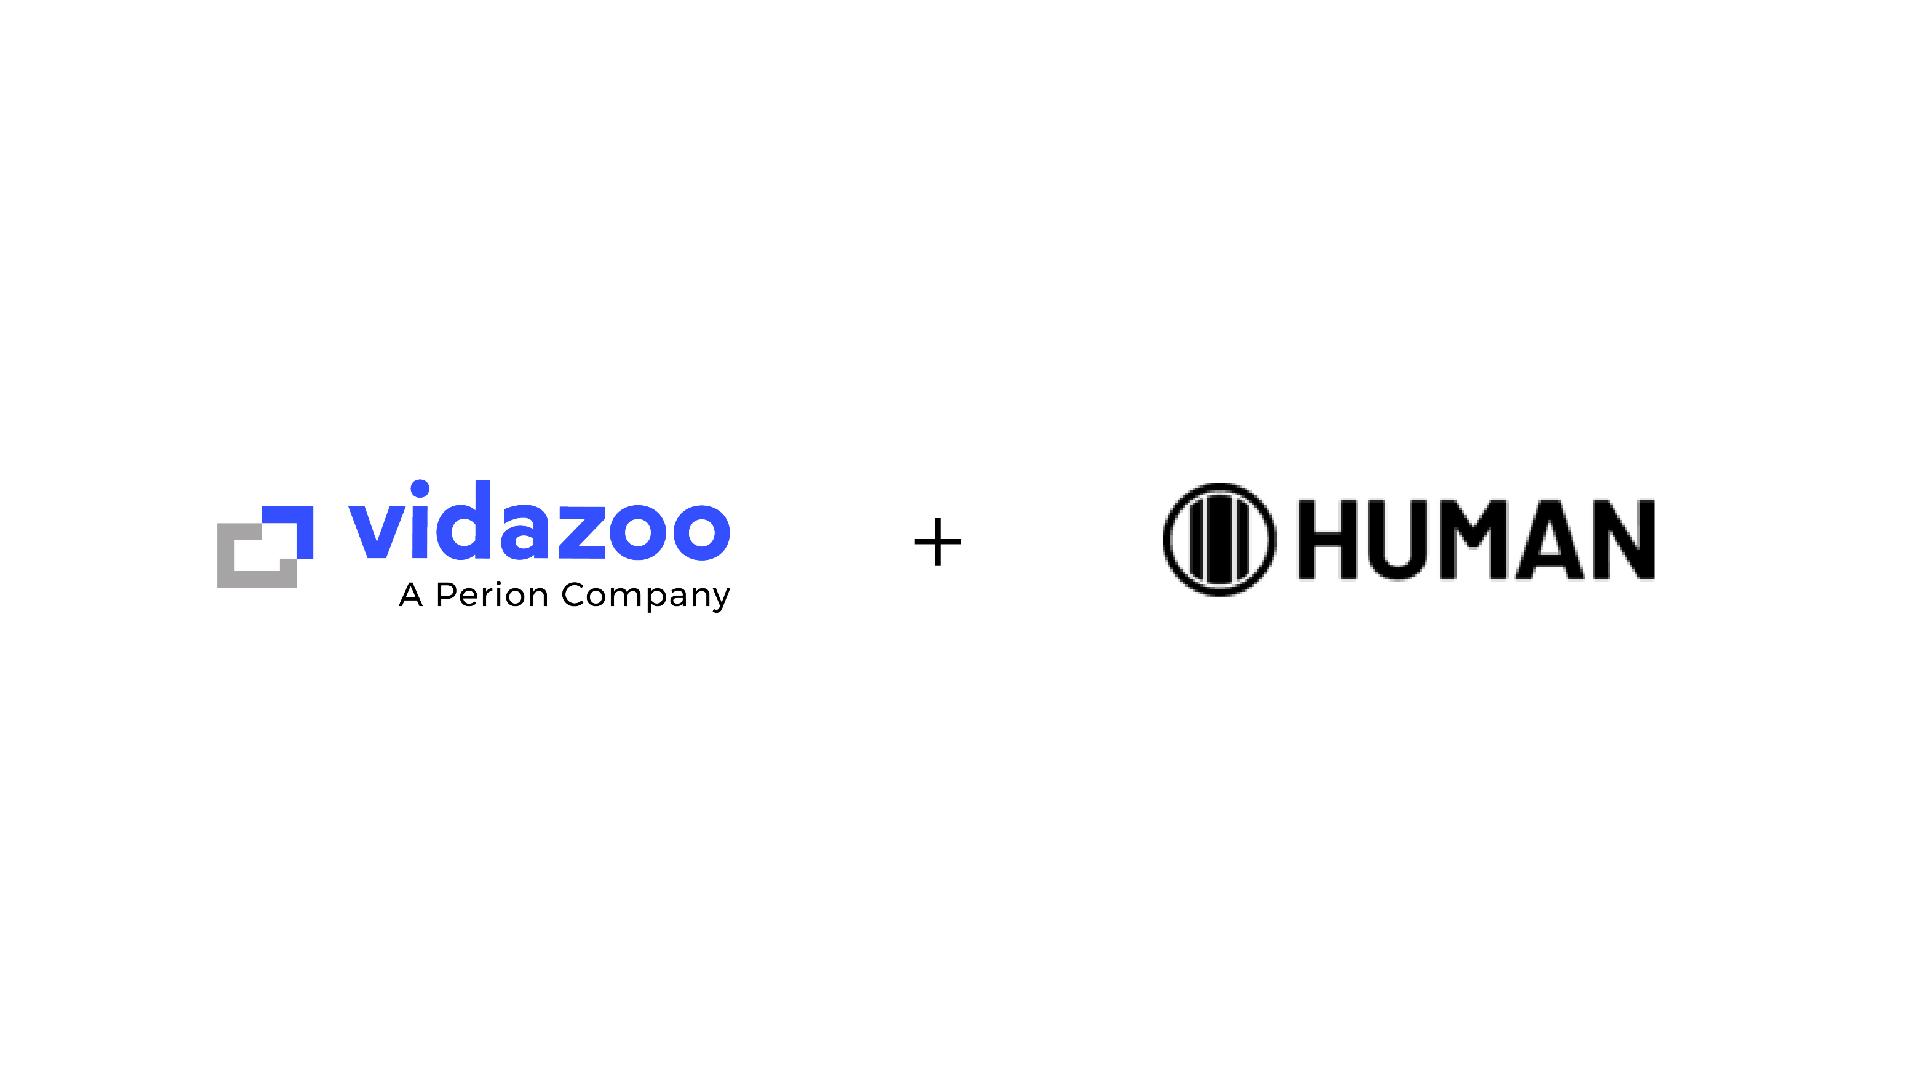 VIDAZOO selects HUMAN to safeguard publishers from traffic fraud across their network and advertising supply chain